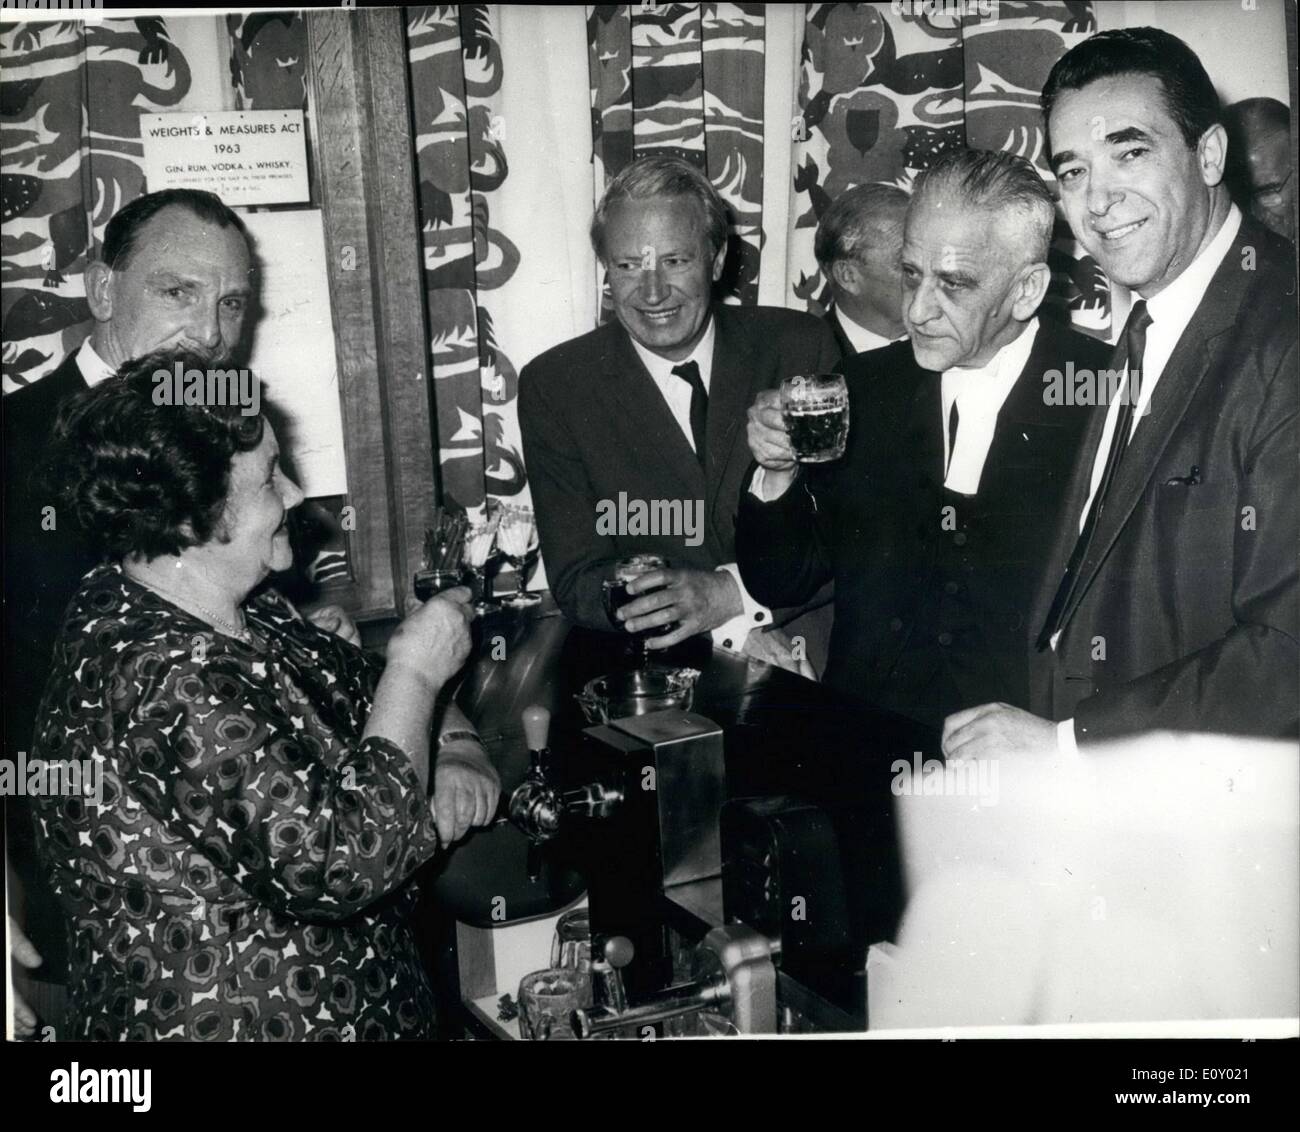 Apr. 04, 1968 - Just like old times. Octogenarian Miss Annie Gilbert, original Annie of Annie's bar in the house of Commons, returned to the palace of Westminster last night, to take a drink with old friends at the opening of the new Annie's Bar, Toasting her are the speaker, Dr, Harold King (centre) Mr. Edward Heath , leader of the opposition, and Captain Robert Maxwell, labour MP of Buckingham and chairman of the catering Sub-Committee at the house (right) Miss Gilbert, who has been housebound with arthritis (right) the past three years at her home in Sutton Stock Photo